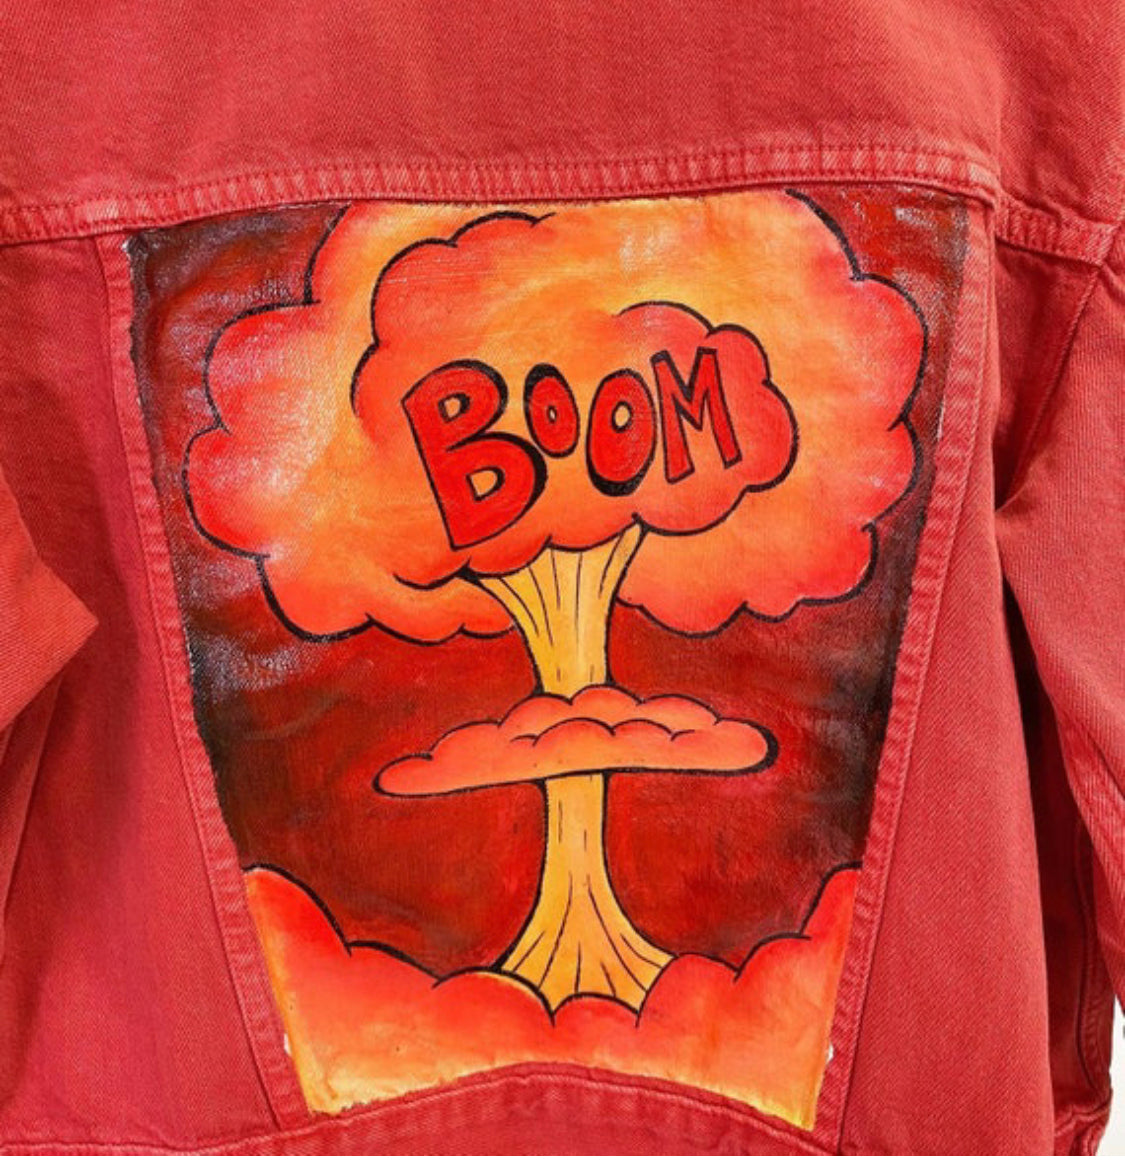 Boom bomb red denim hand painted jacket